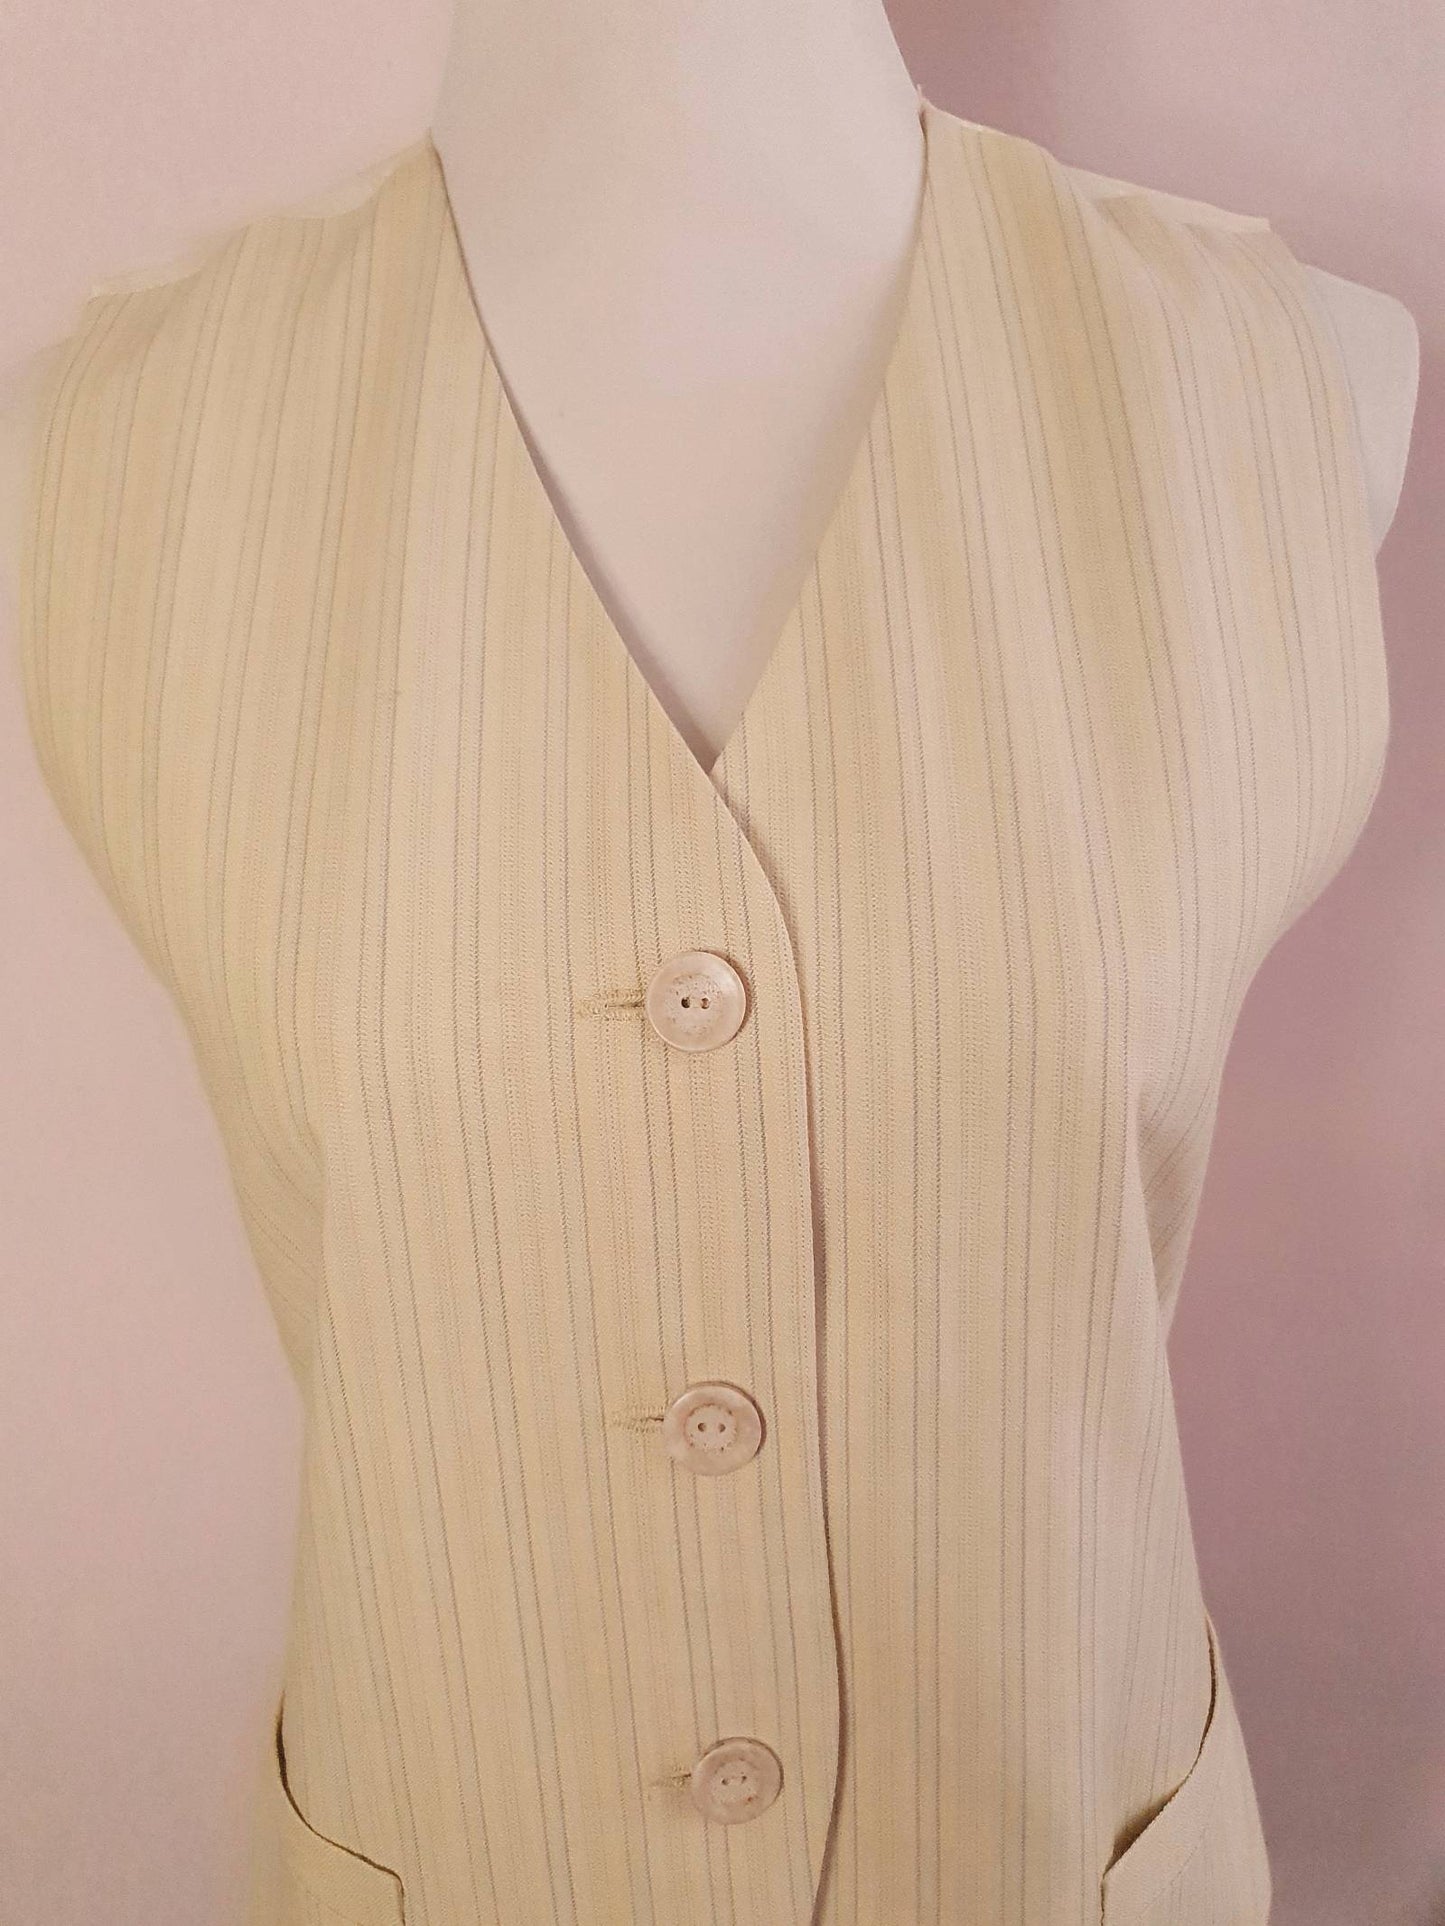 Cool Vintage 1990s Striped Yellow Waistcoat vest - Size 8/10